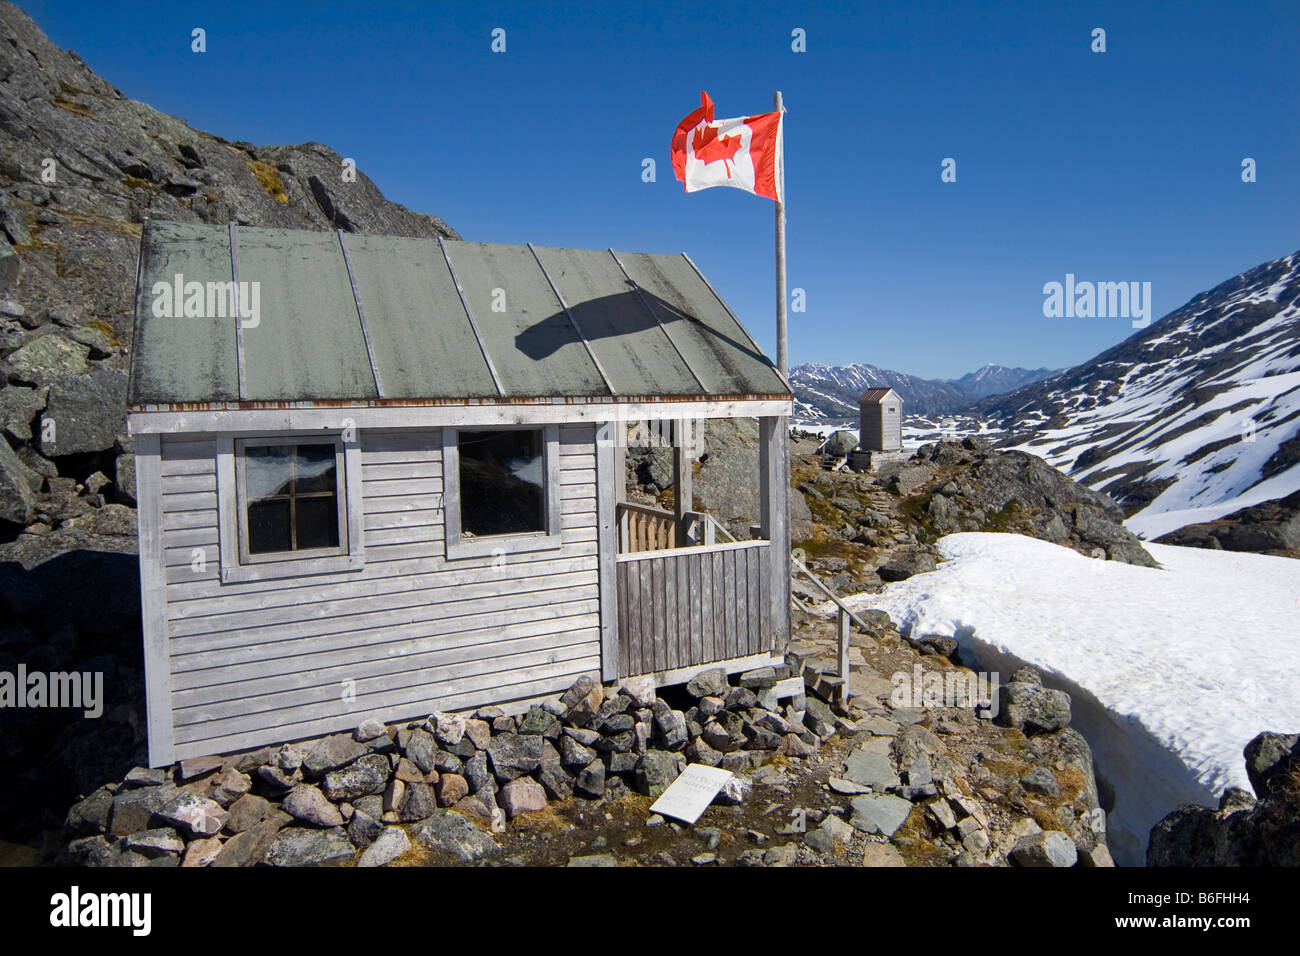 Hikers' shelter at the summit, Canadian flag, Chilkoot Trail, Chilkoot Pass, British Columbia, B.C., Canada, North America Stock Photo